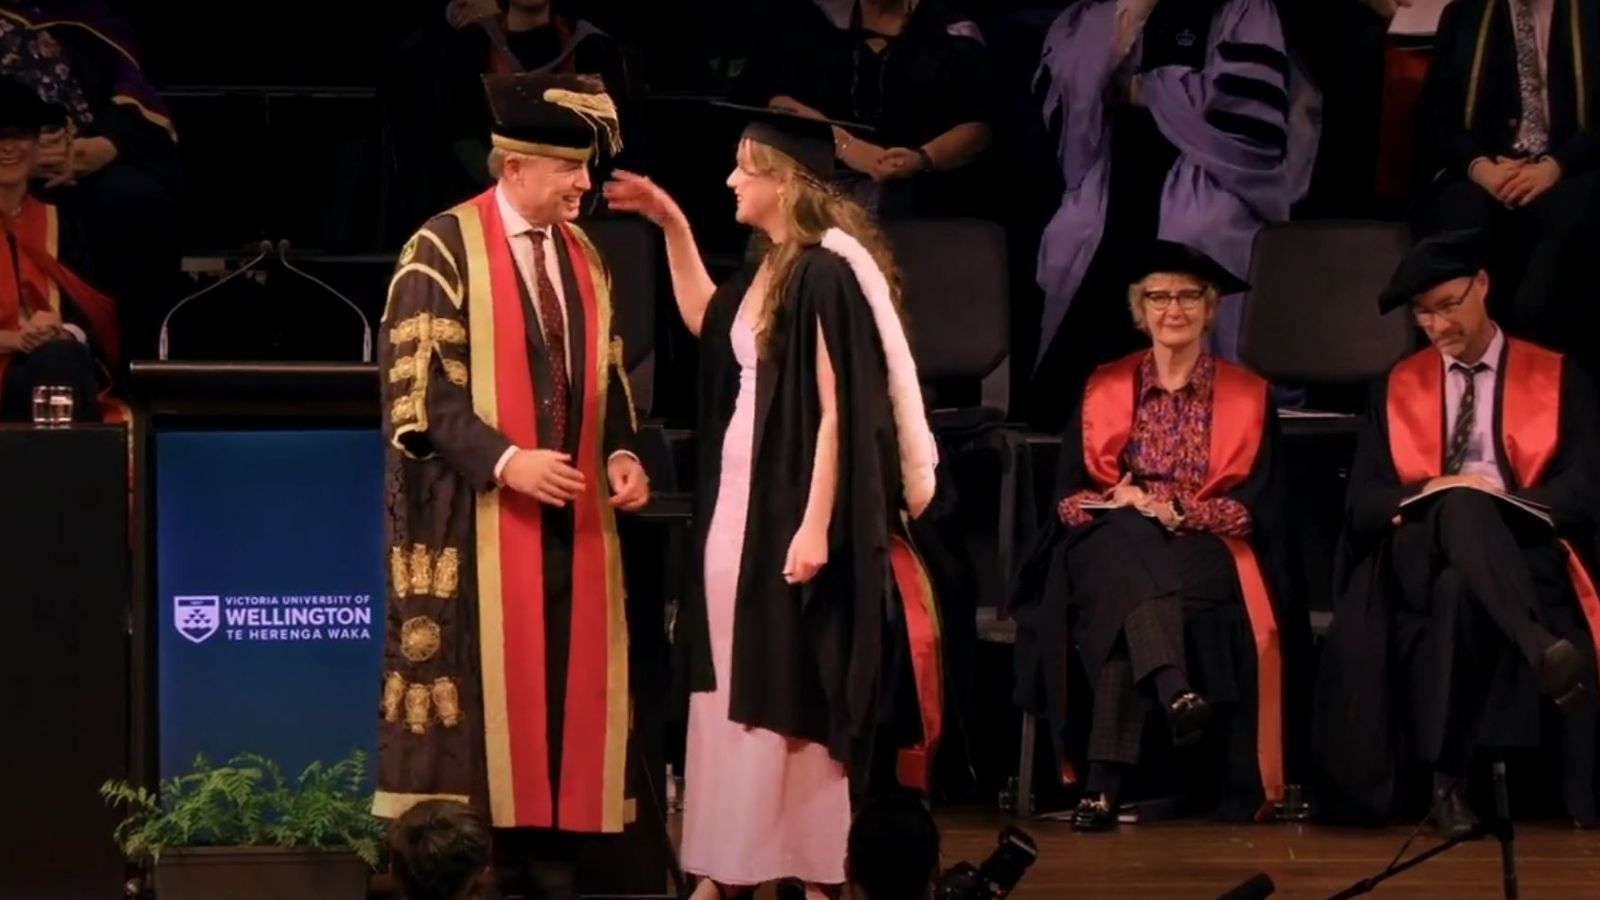 A woman dressed in academic robes reaching up toward the Chancellor